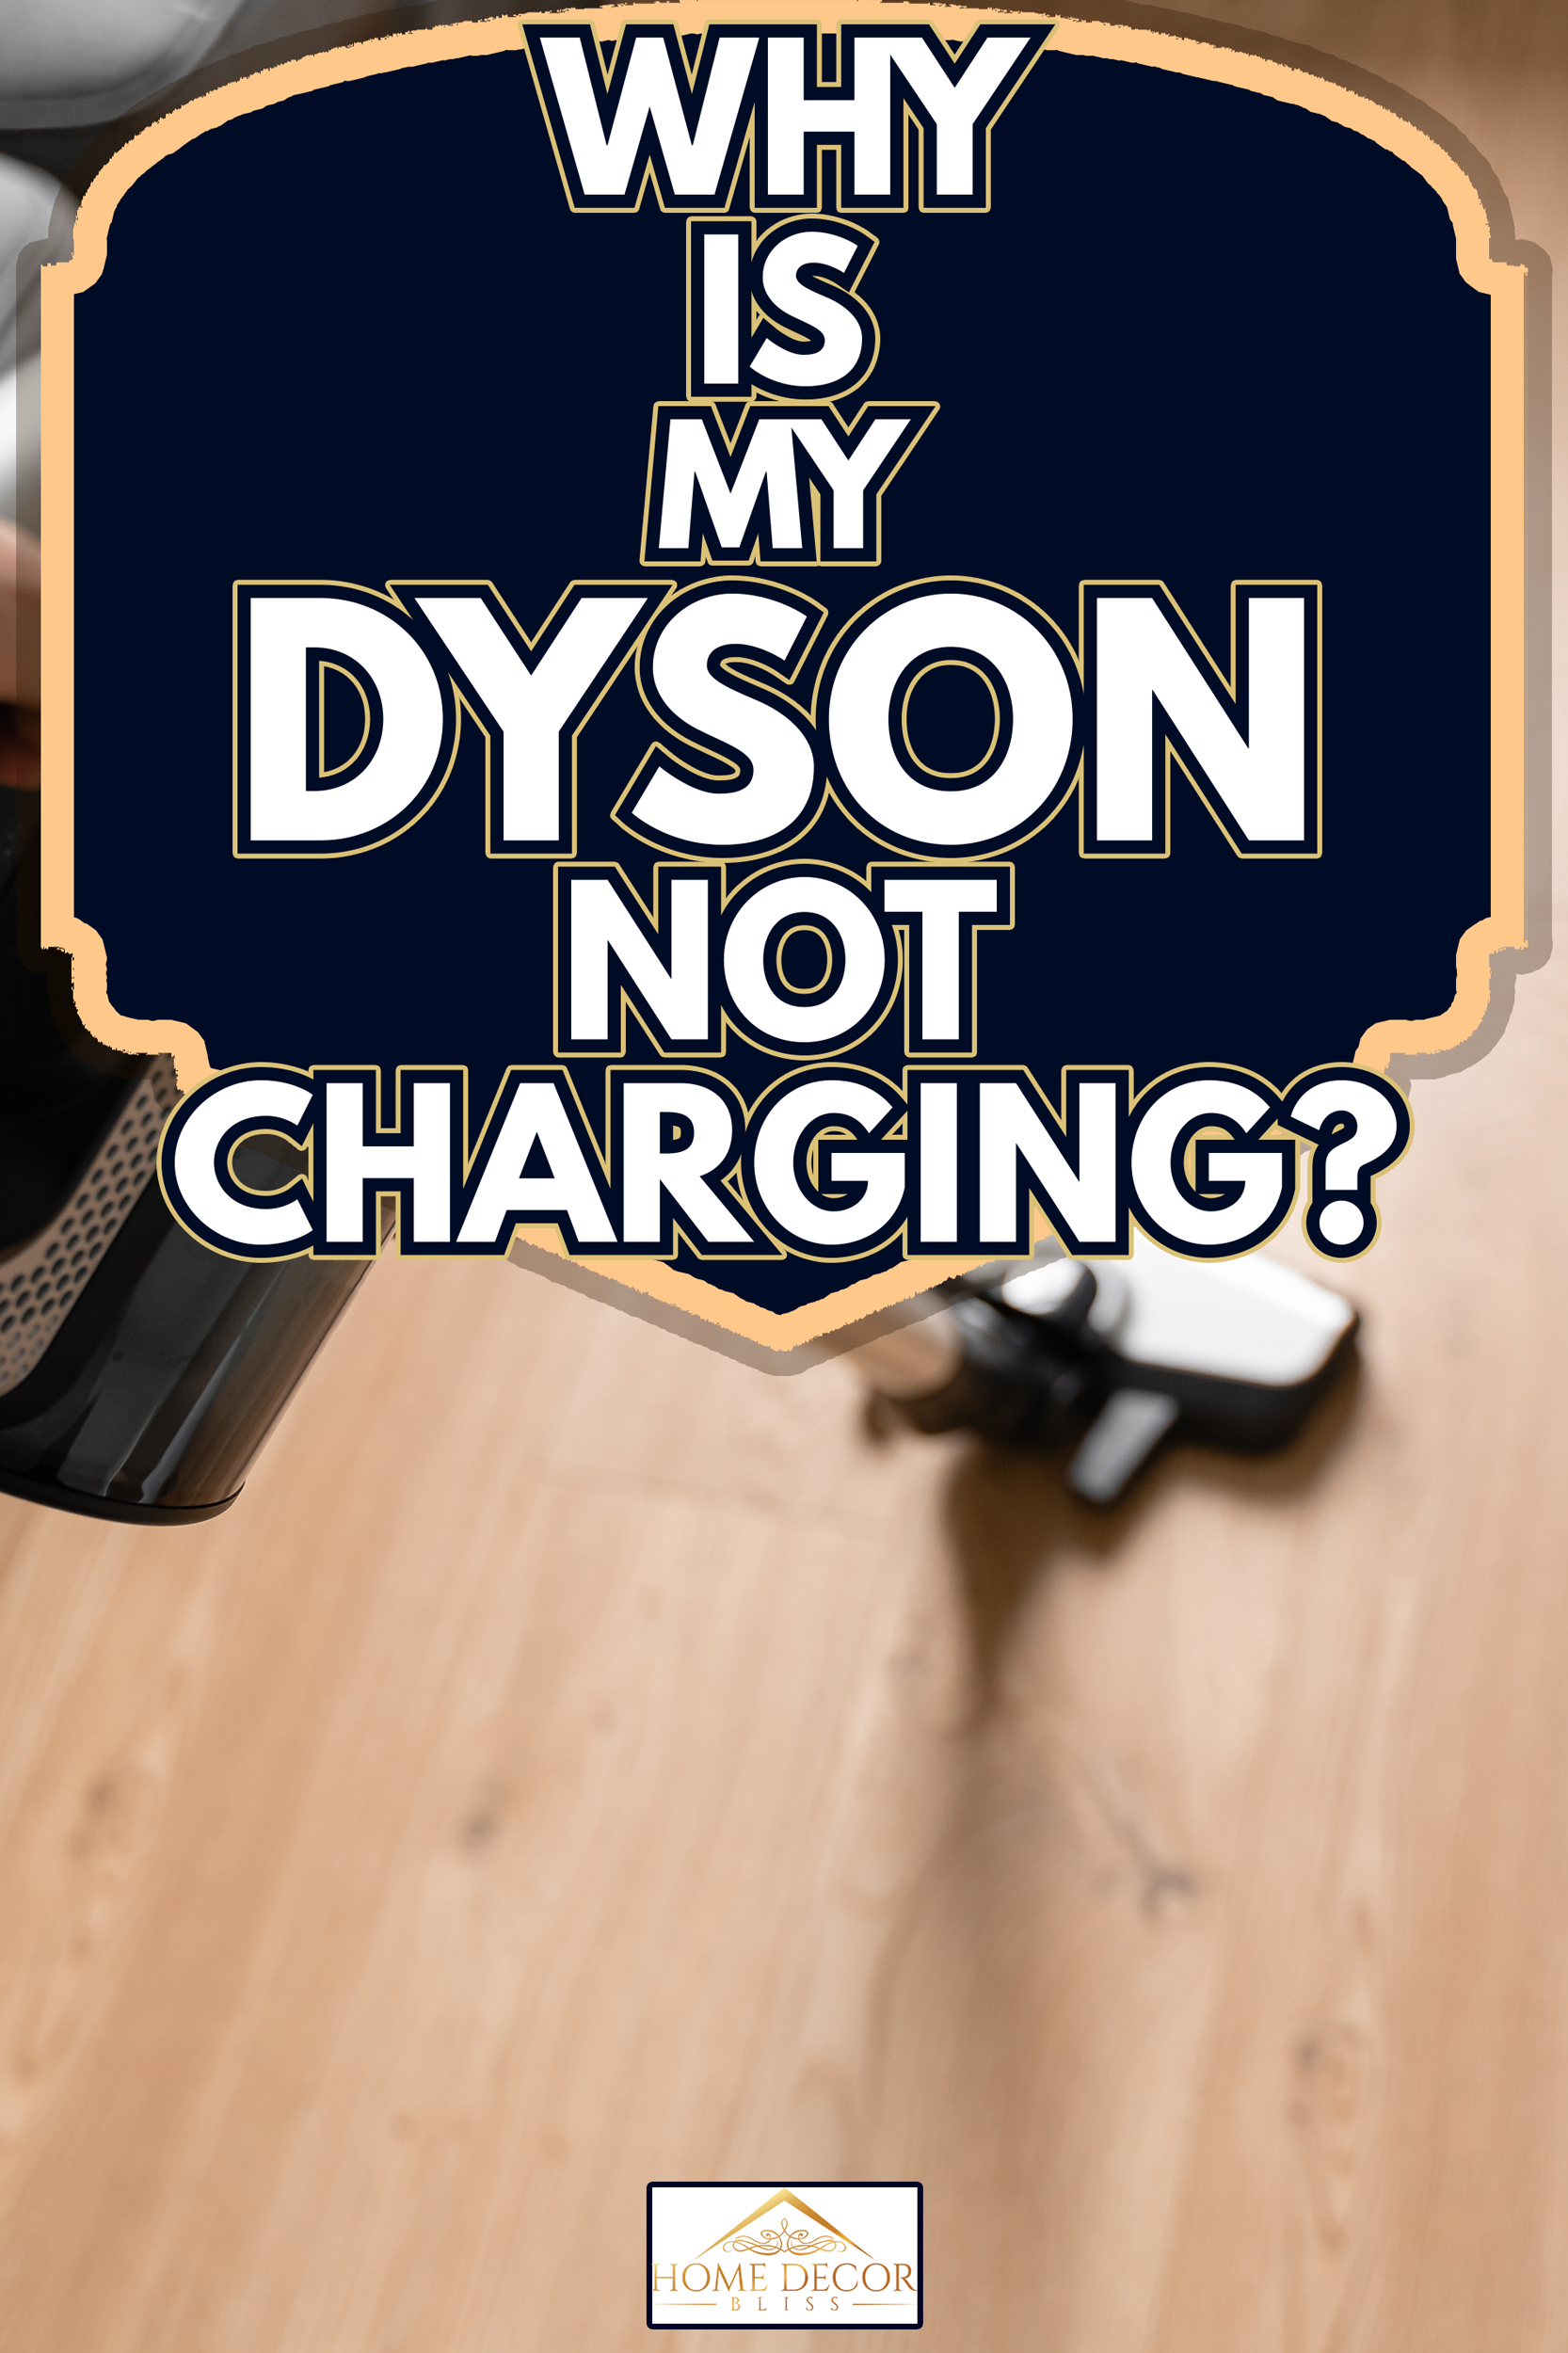 Cleaning wooden floor with wireless vacuum cleaner. Handheld cordless cleaner. Household appliance. Housework modern equipment - Why Is My Dyson Not Charging